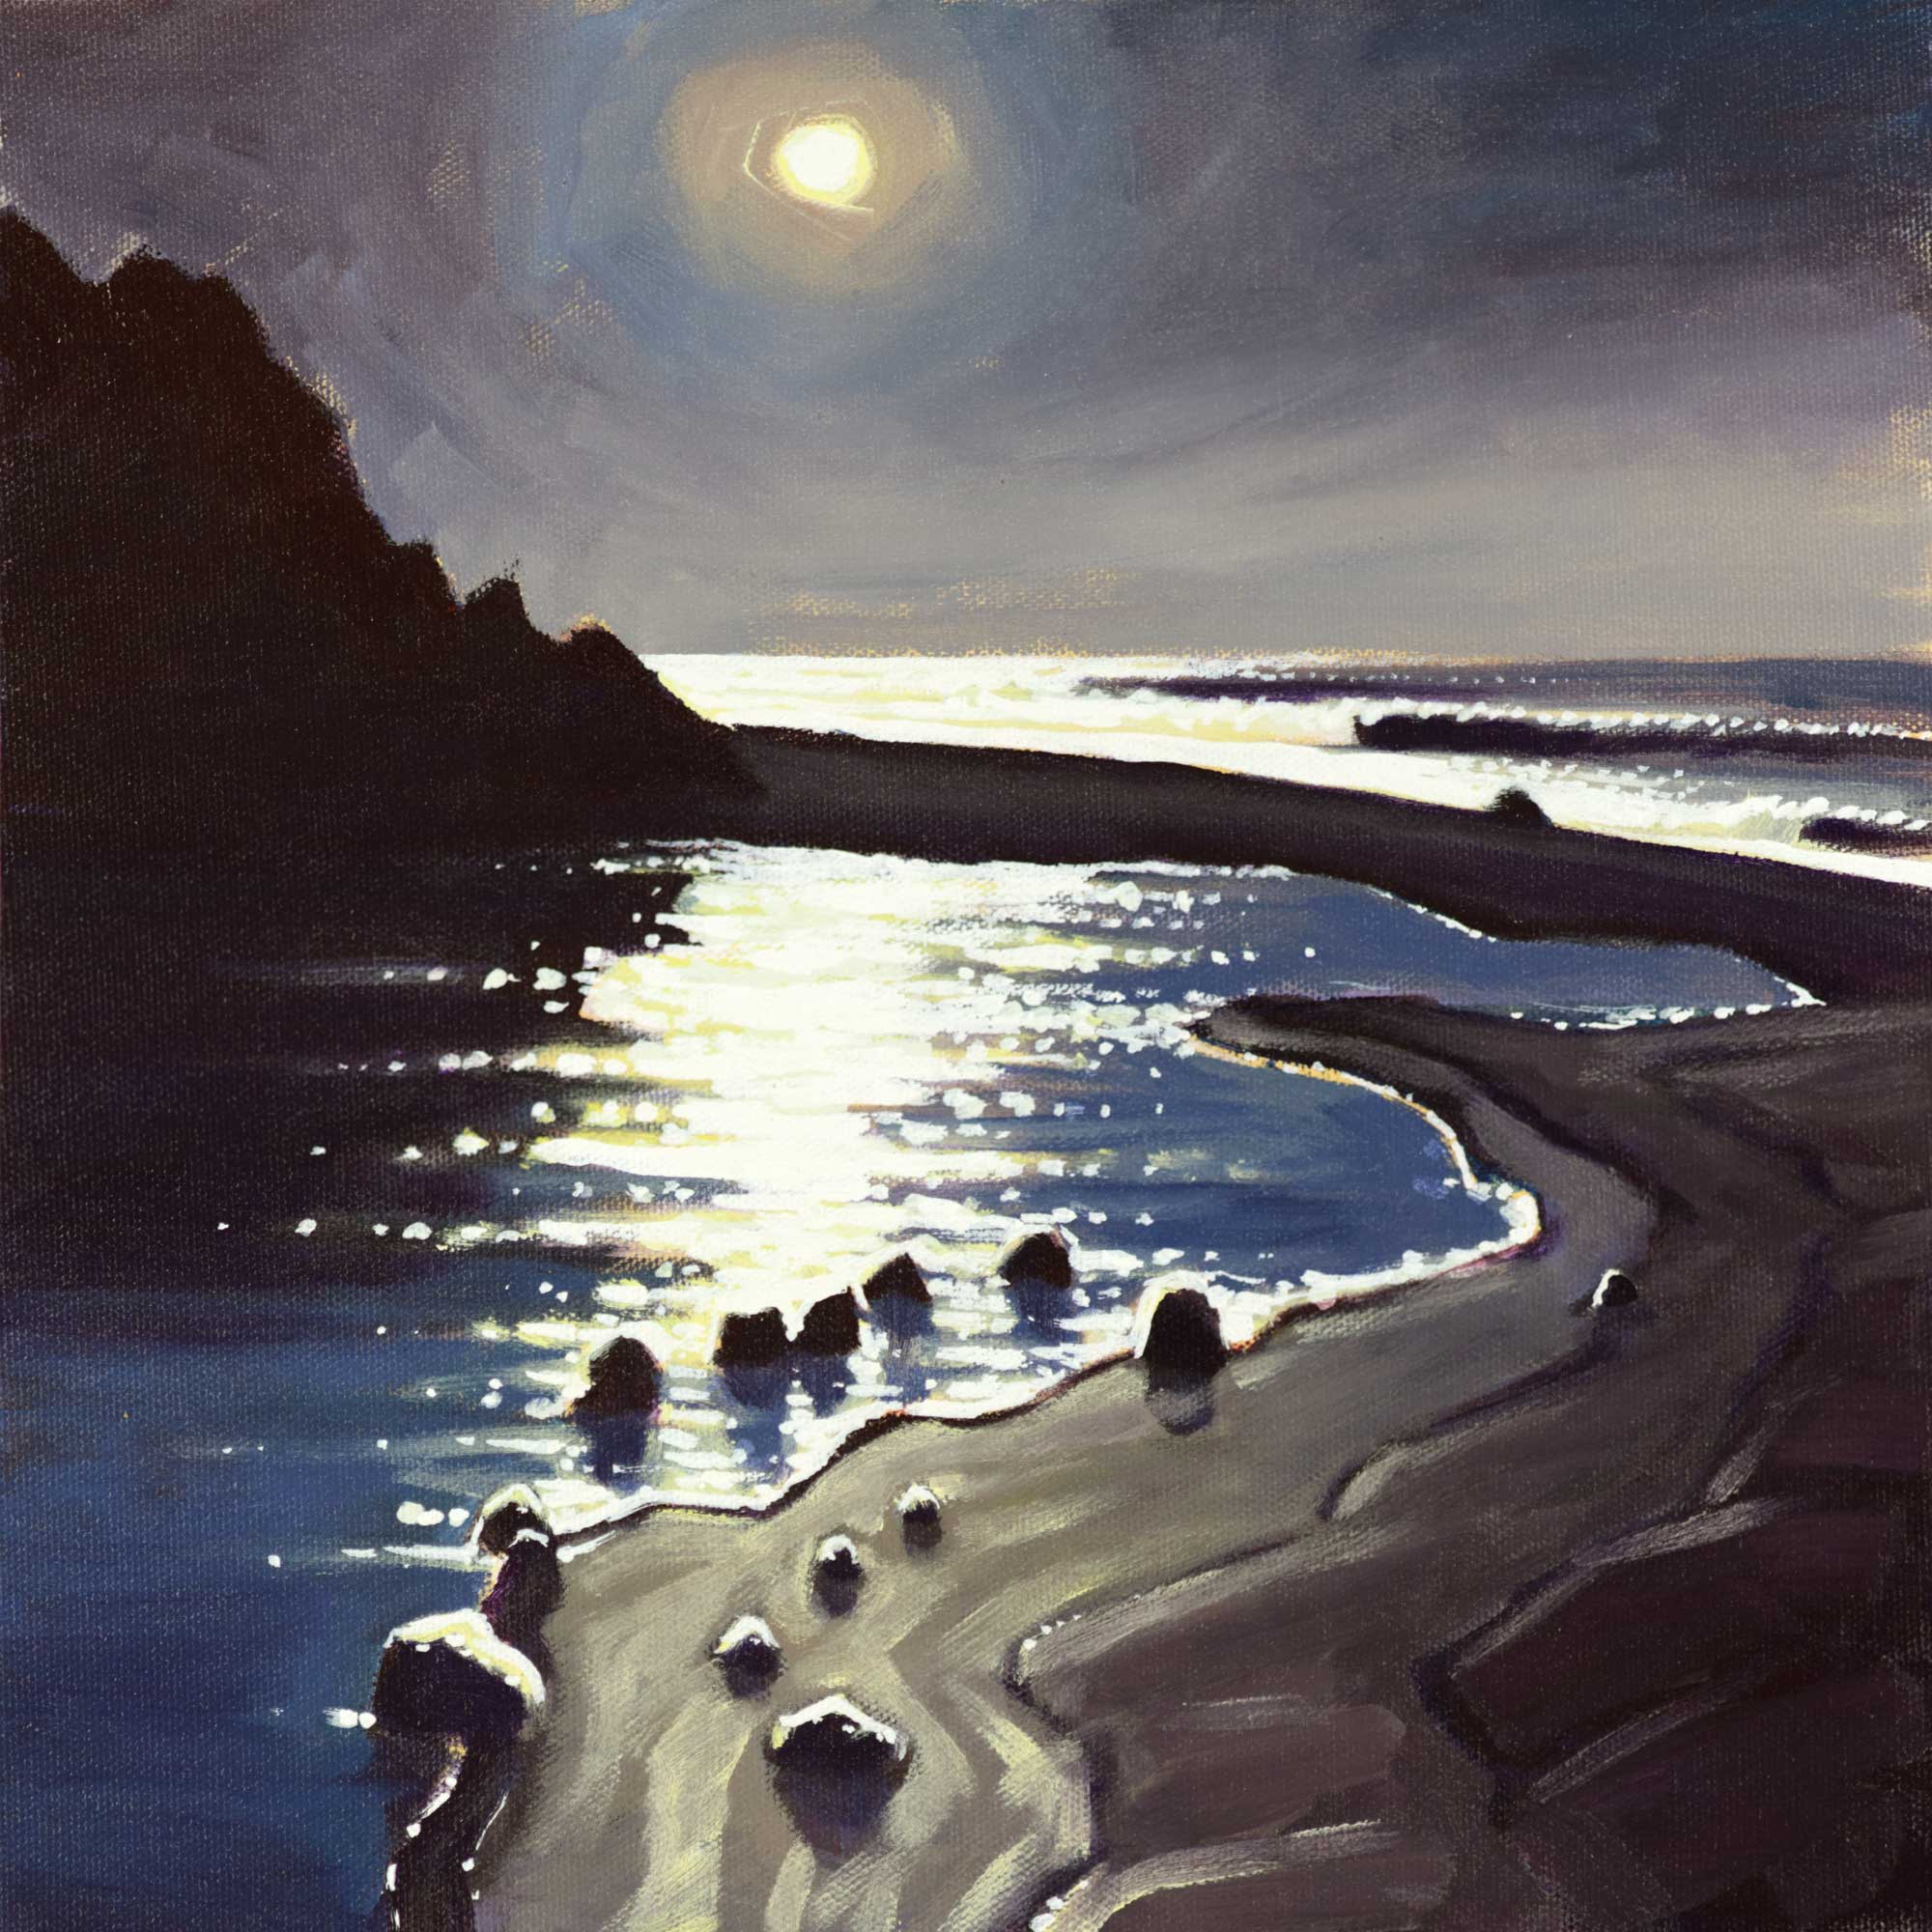 Plein air nocturne painting of Cooskie Creek on the Lost Coast Trail on the Humboldt Coast of Northern California